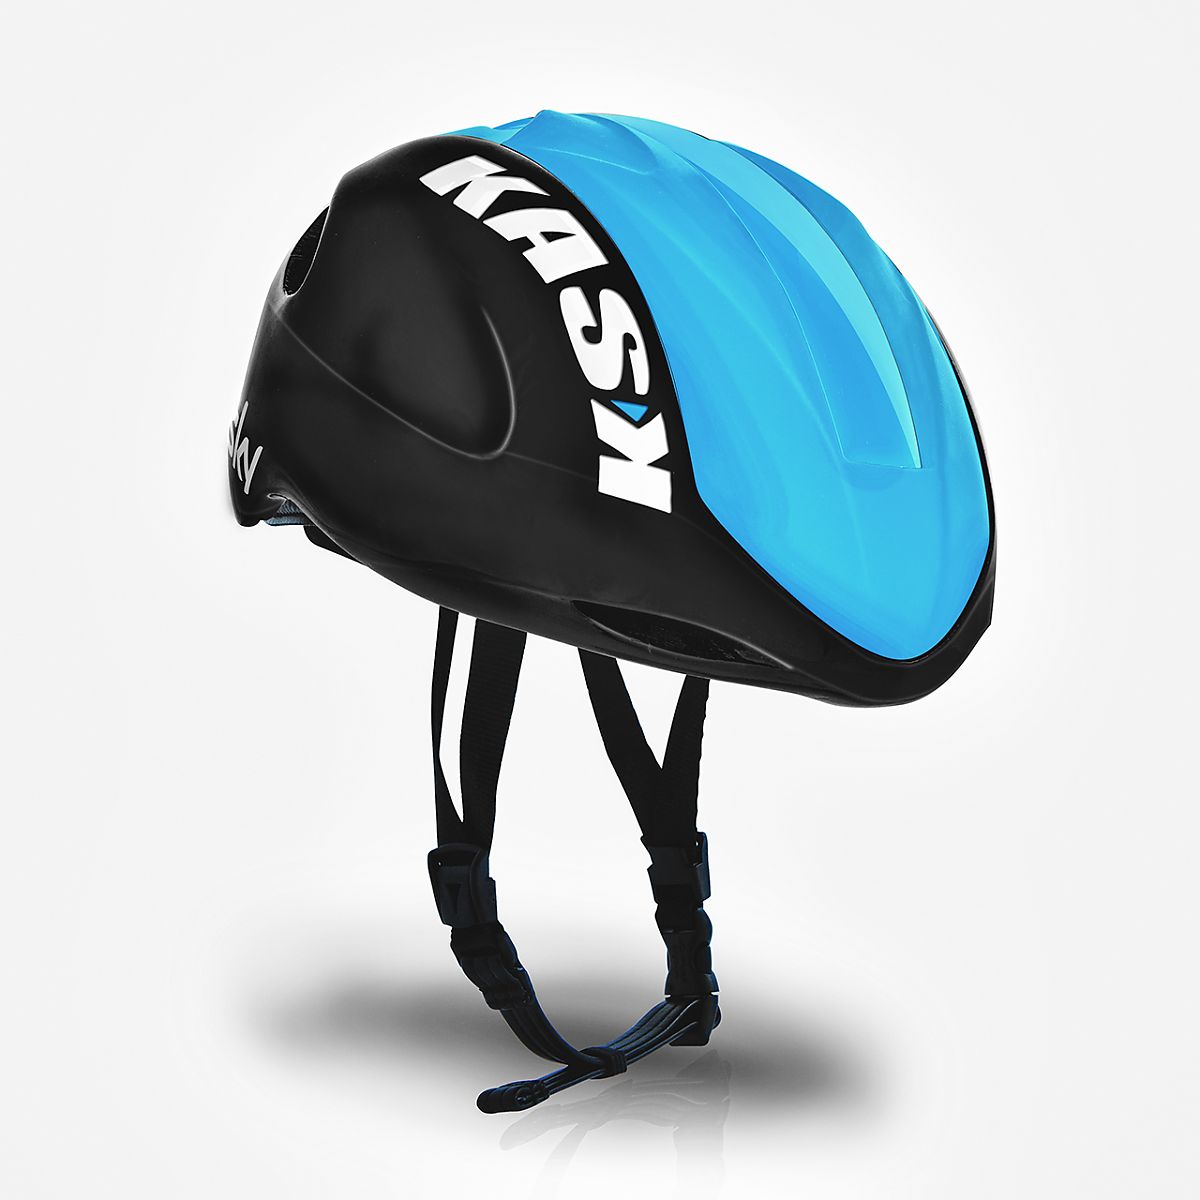 KASK%20Infinity_front_closed.jpg